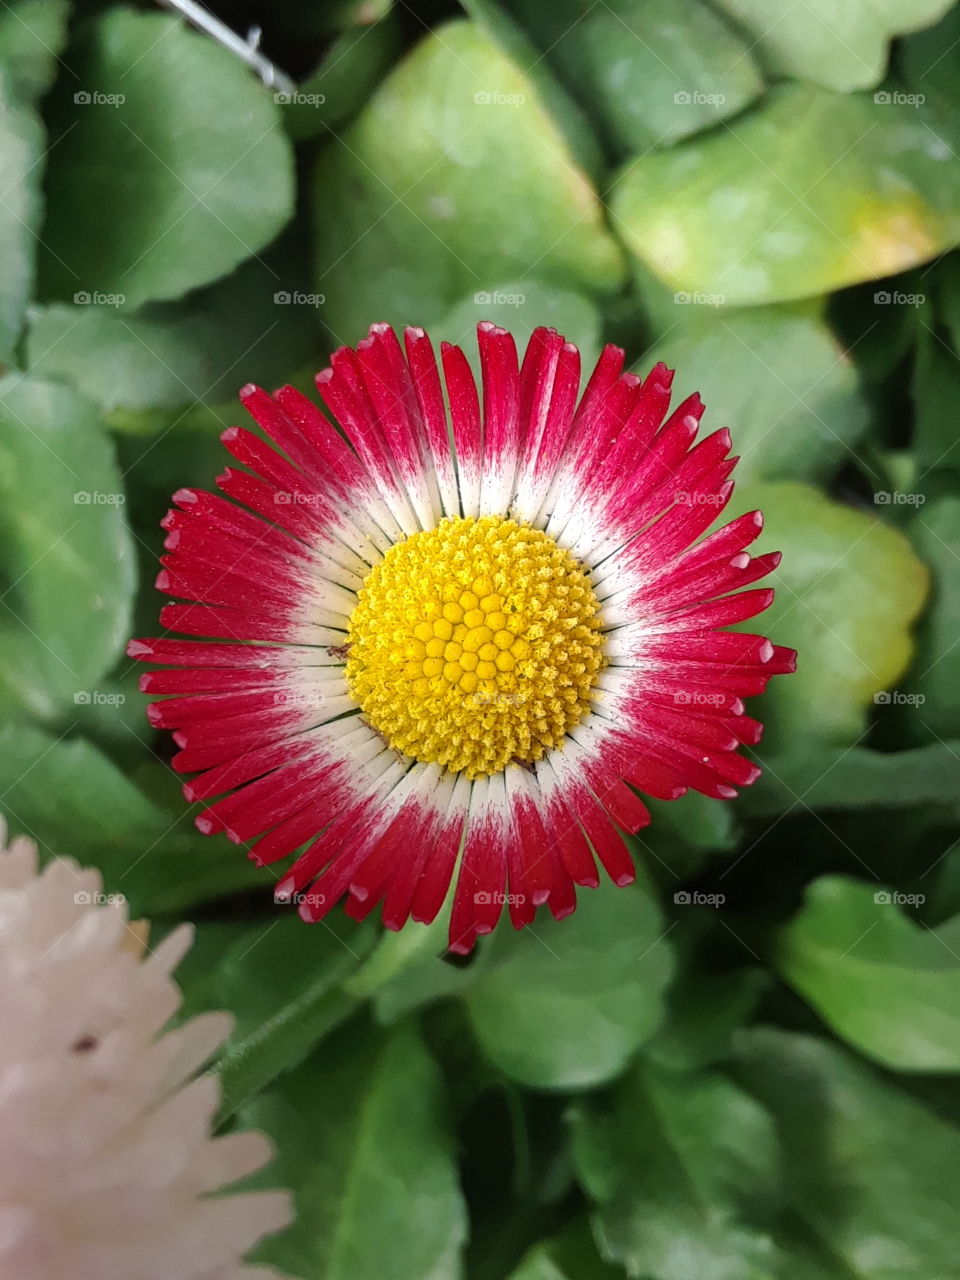 flower red with yellow center